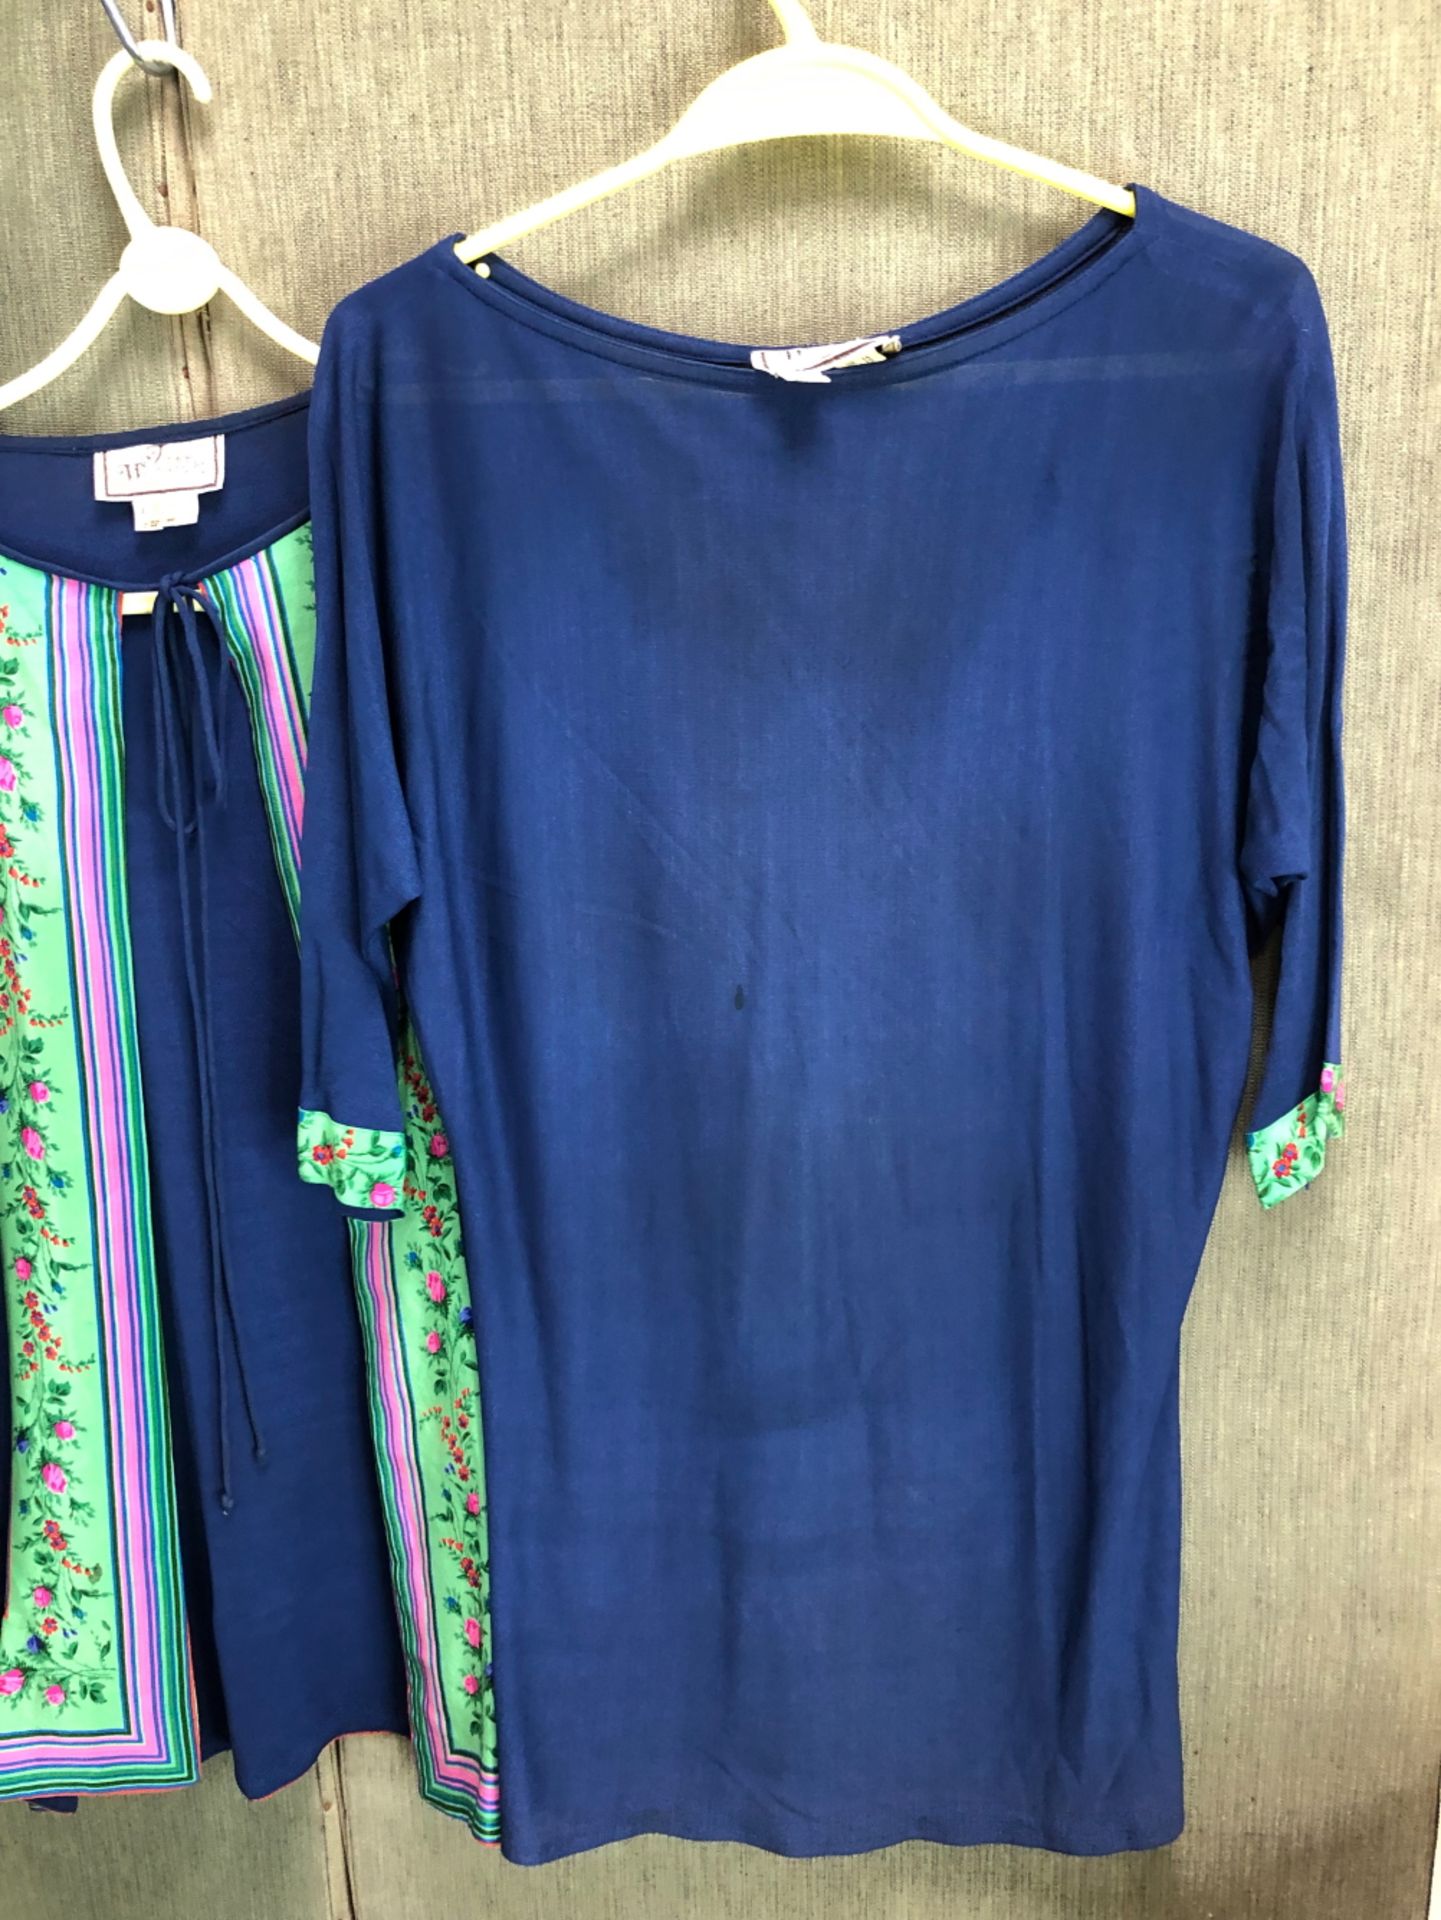 A JANICE WAINWRIGHT UK 14 NAVY AND FLORAL SHEER TUNIC TIE UP TOP WITH MATCHING 3/4 SLEEVE TOP - Image 7 of 11